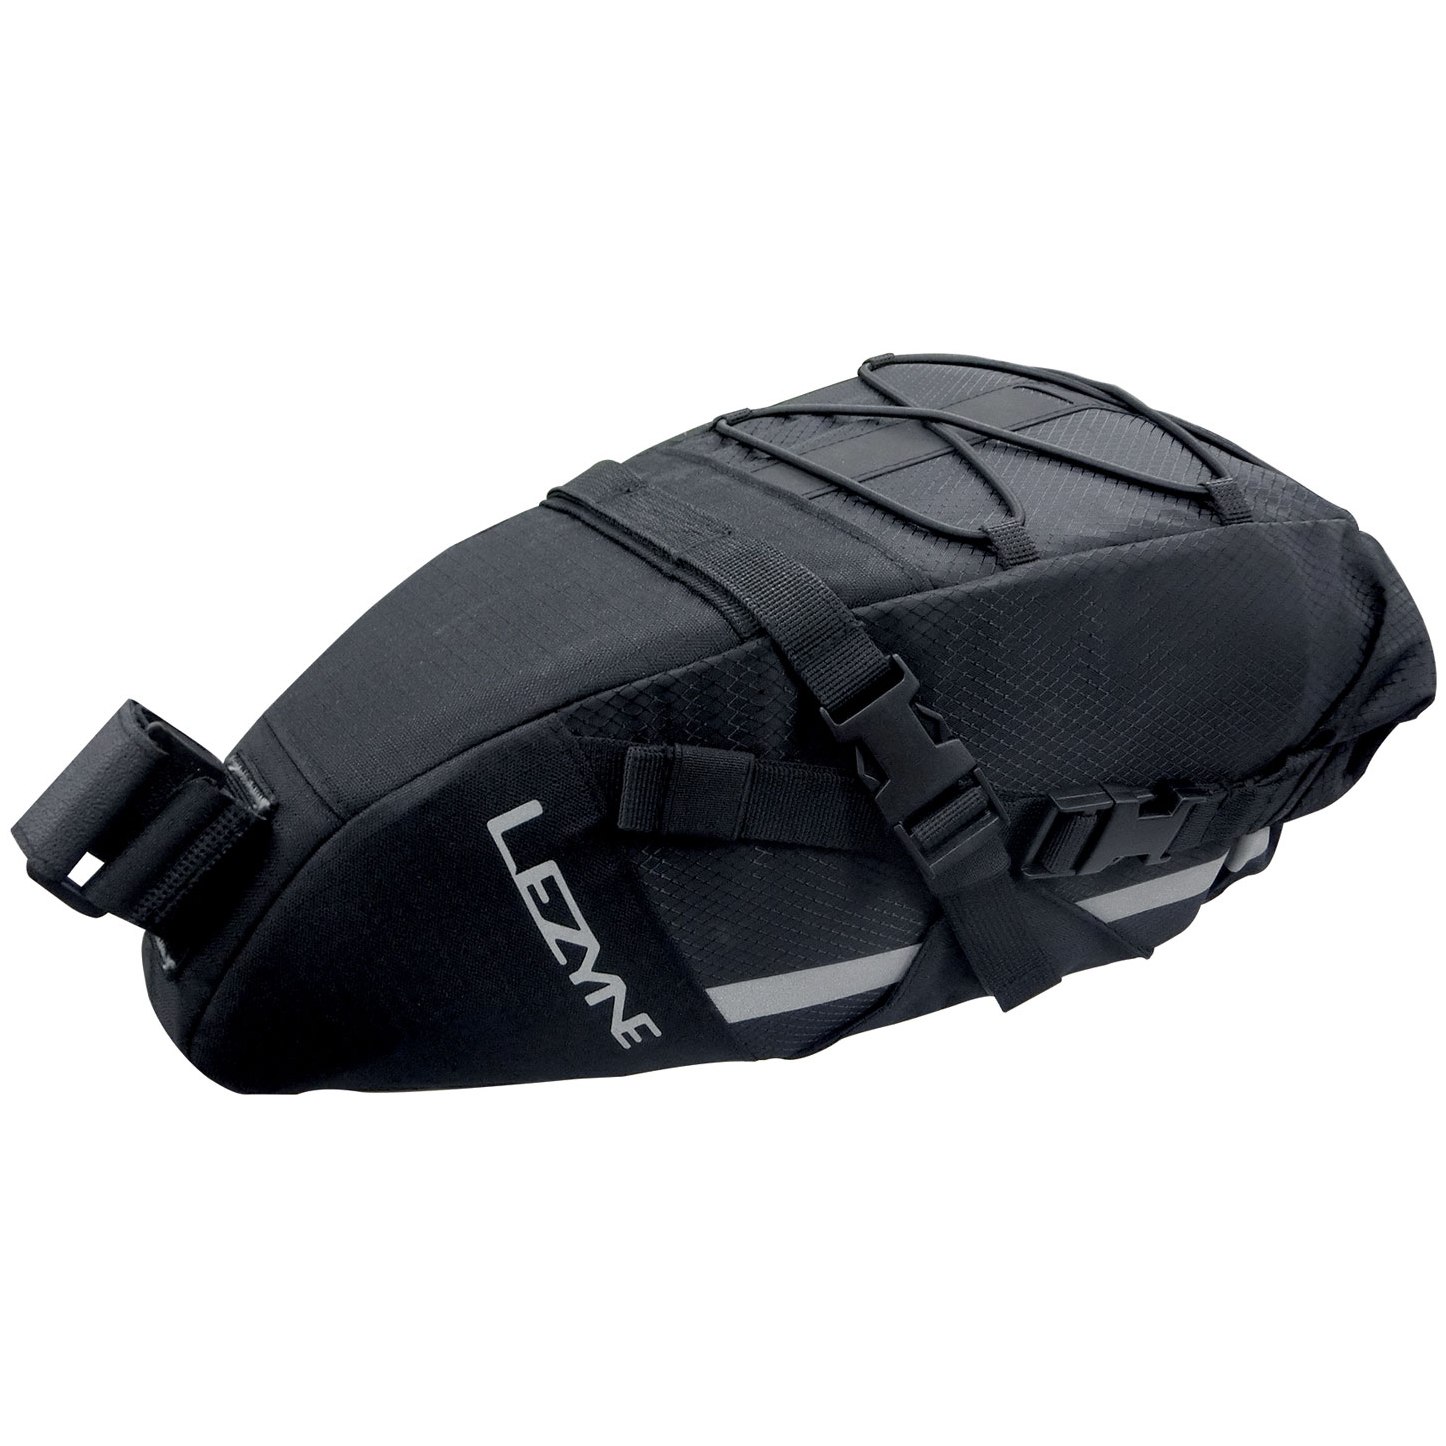 Picture of Lezyne XL-Caddy Saddle Bag - black